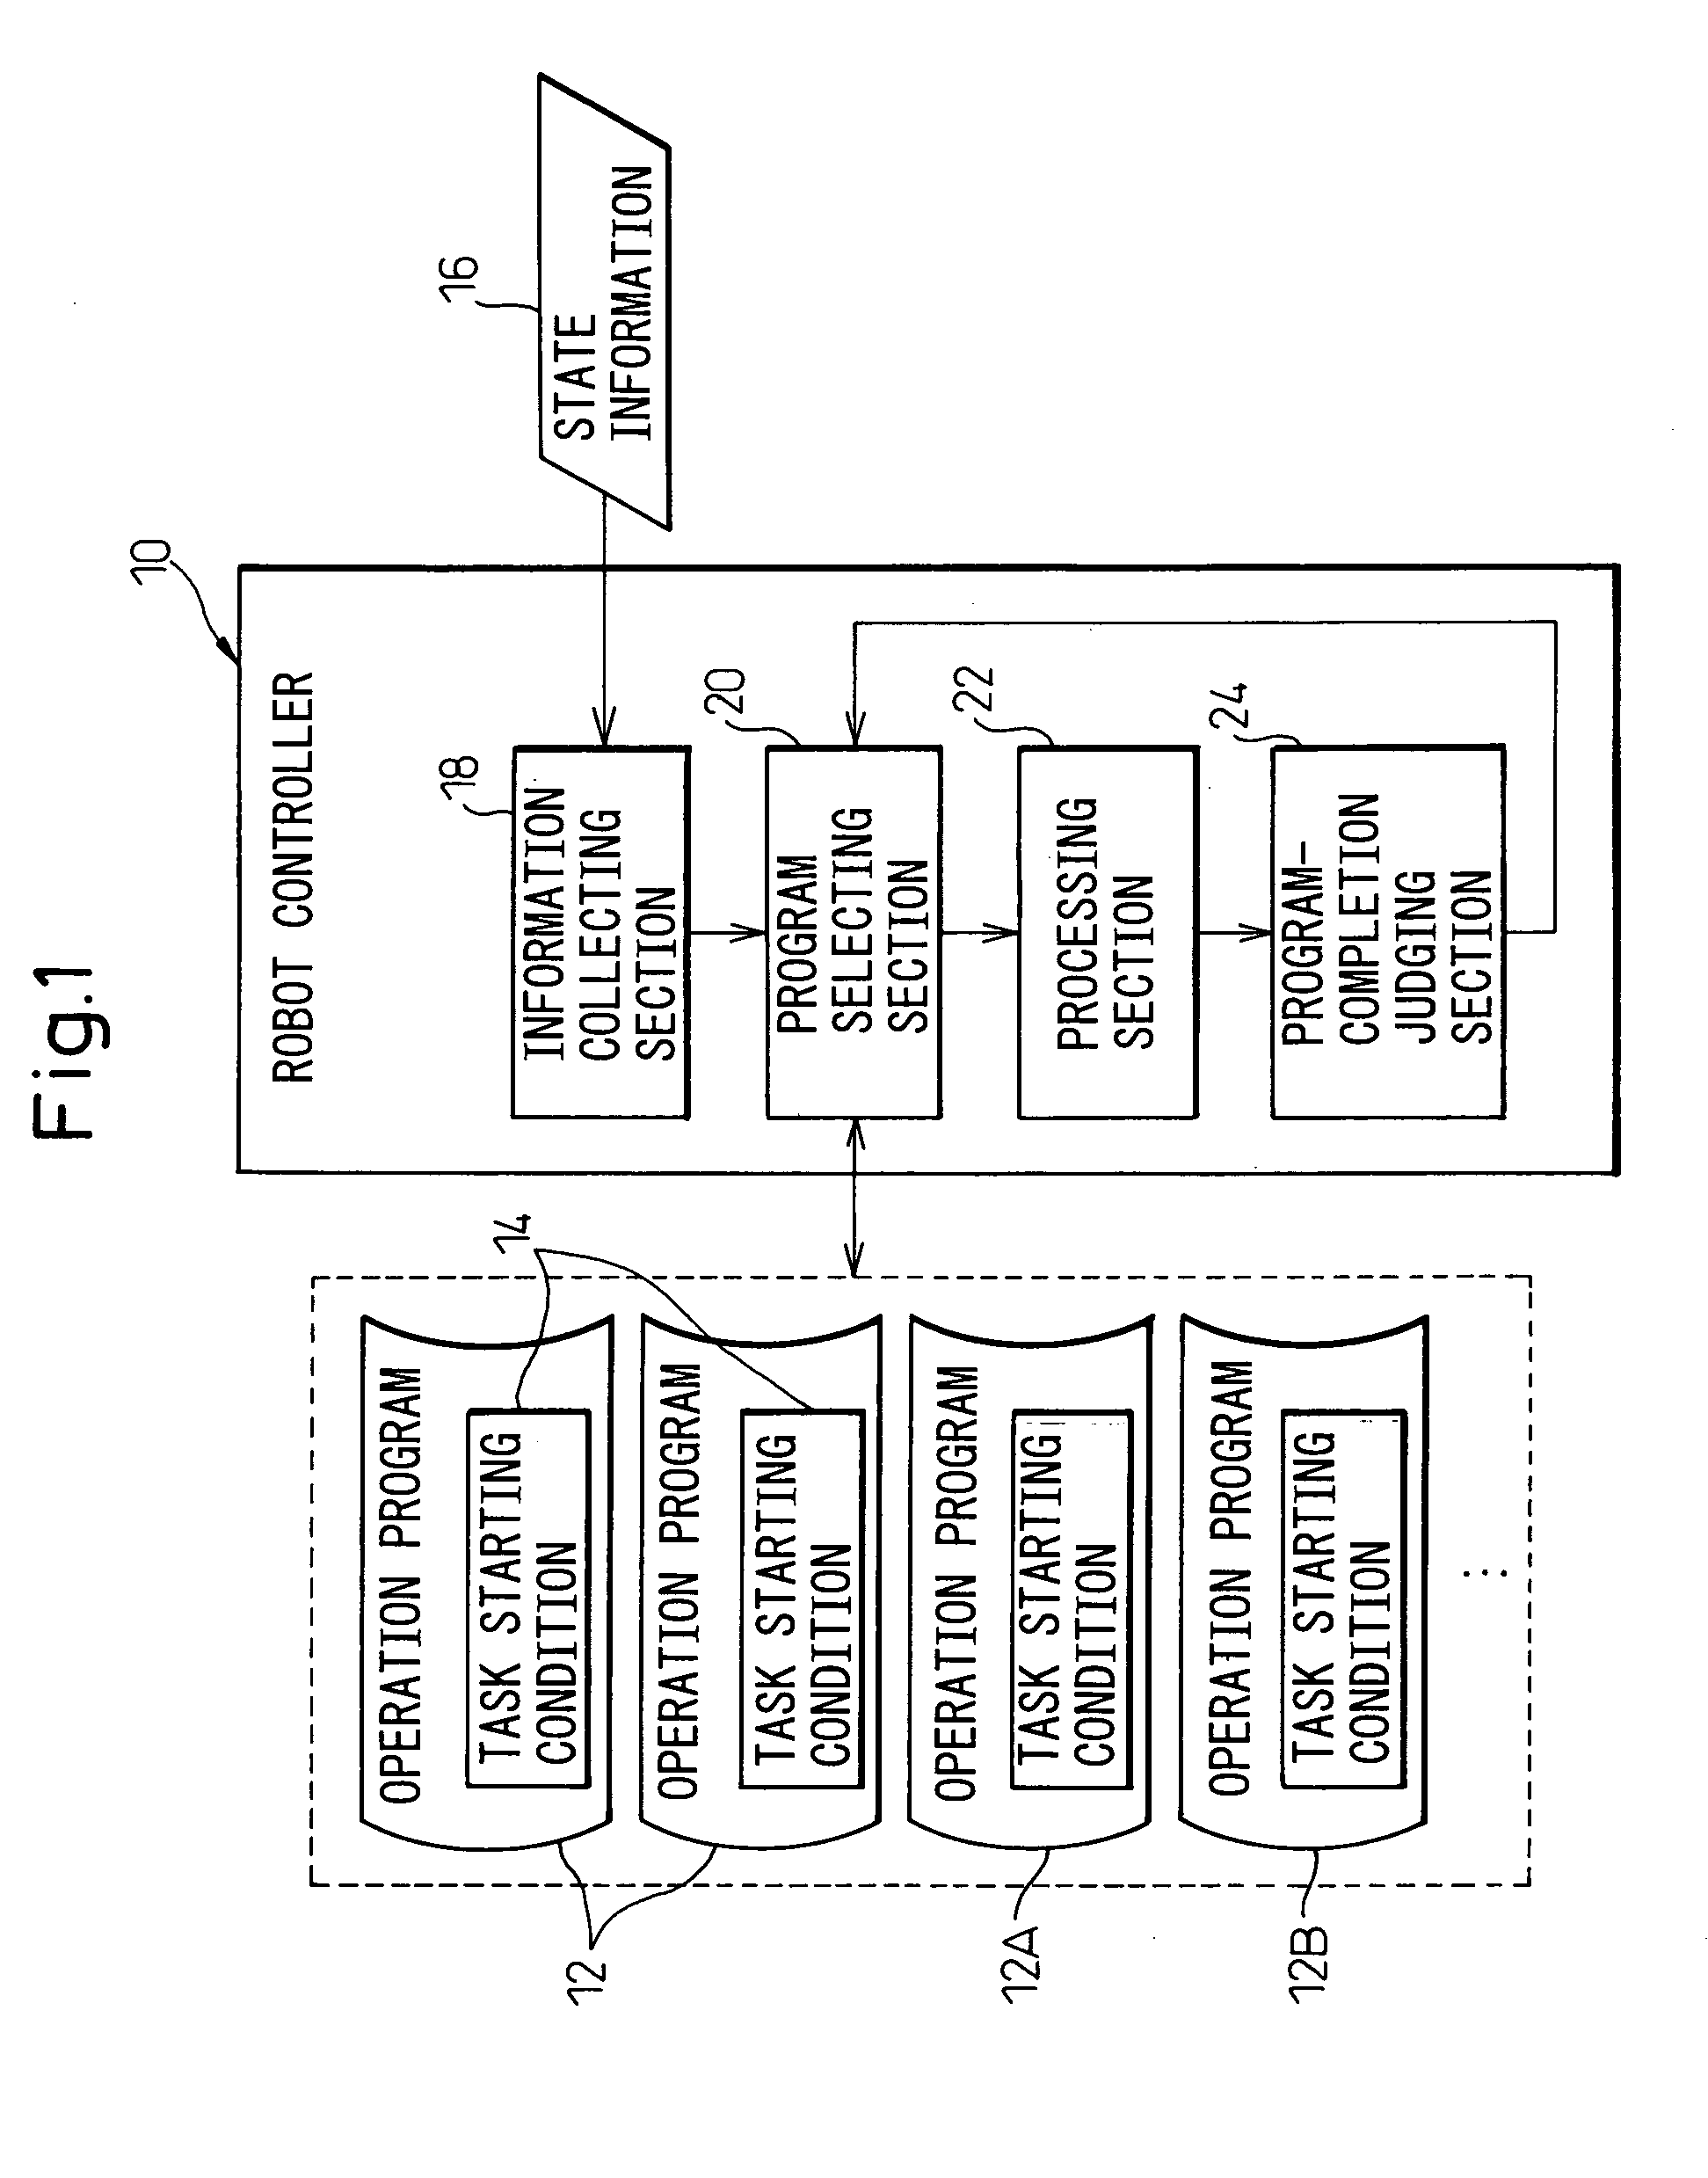 Device and method for controlling robot